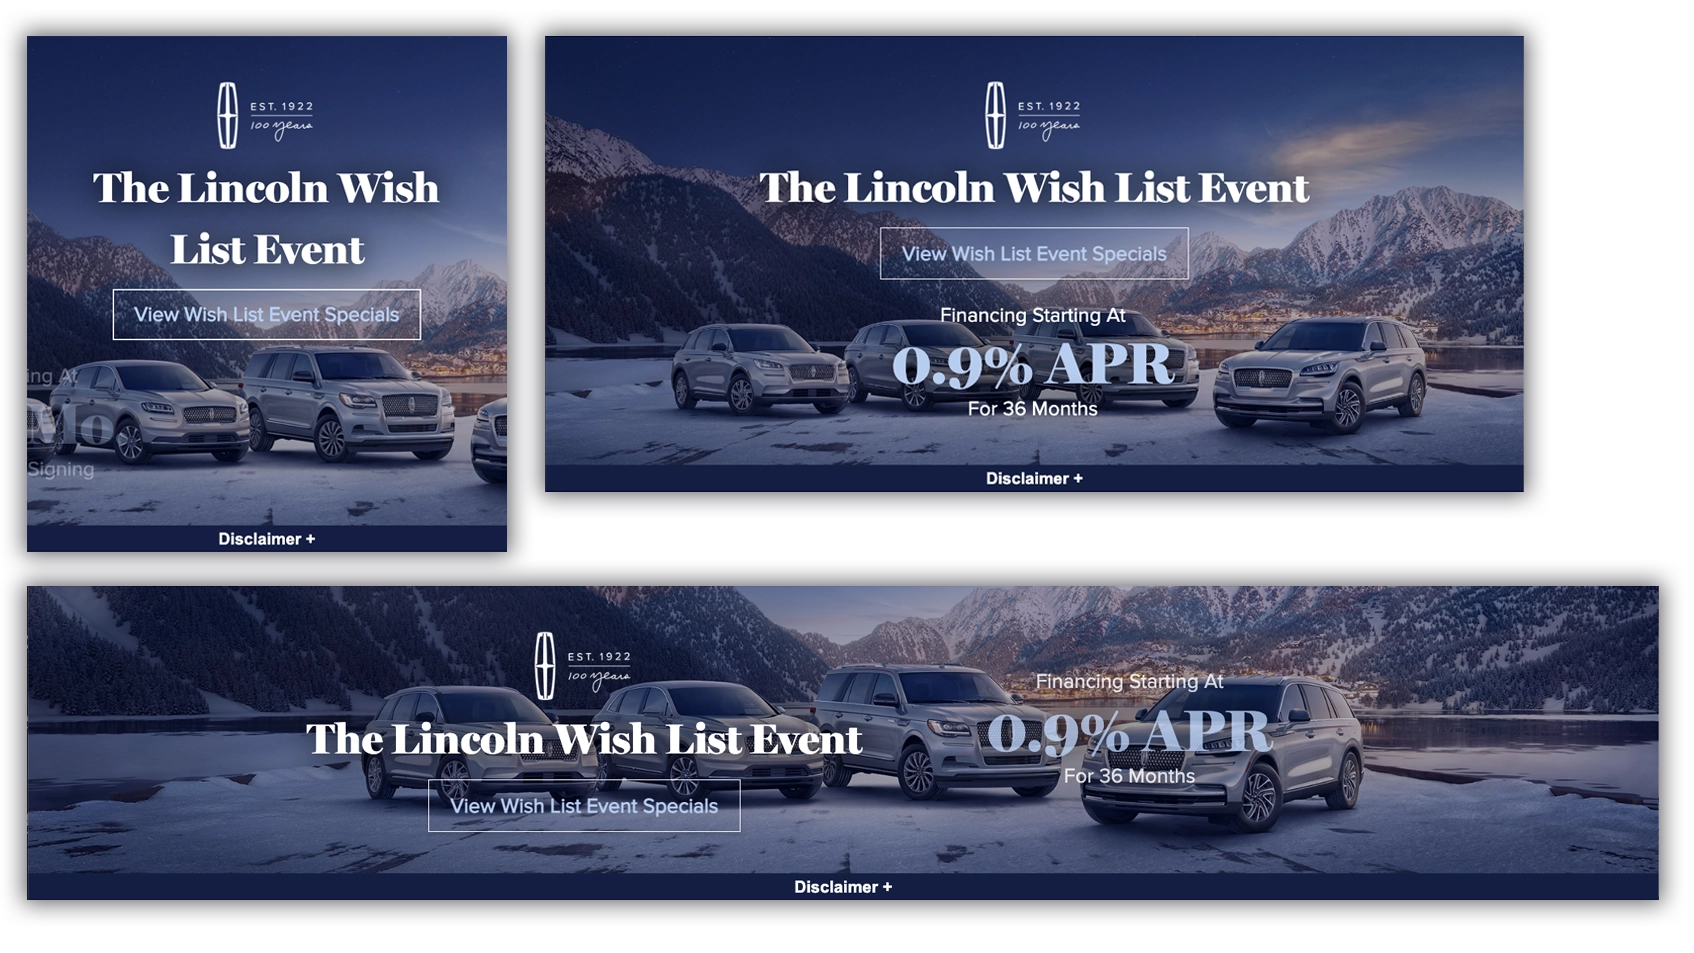 Lincoln Wish List Event web banners